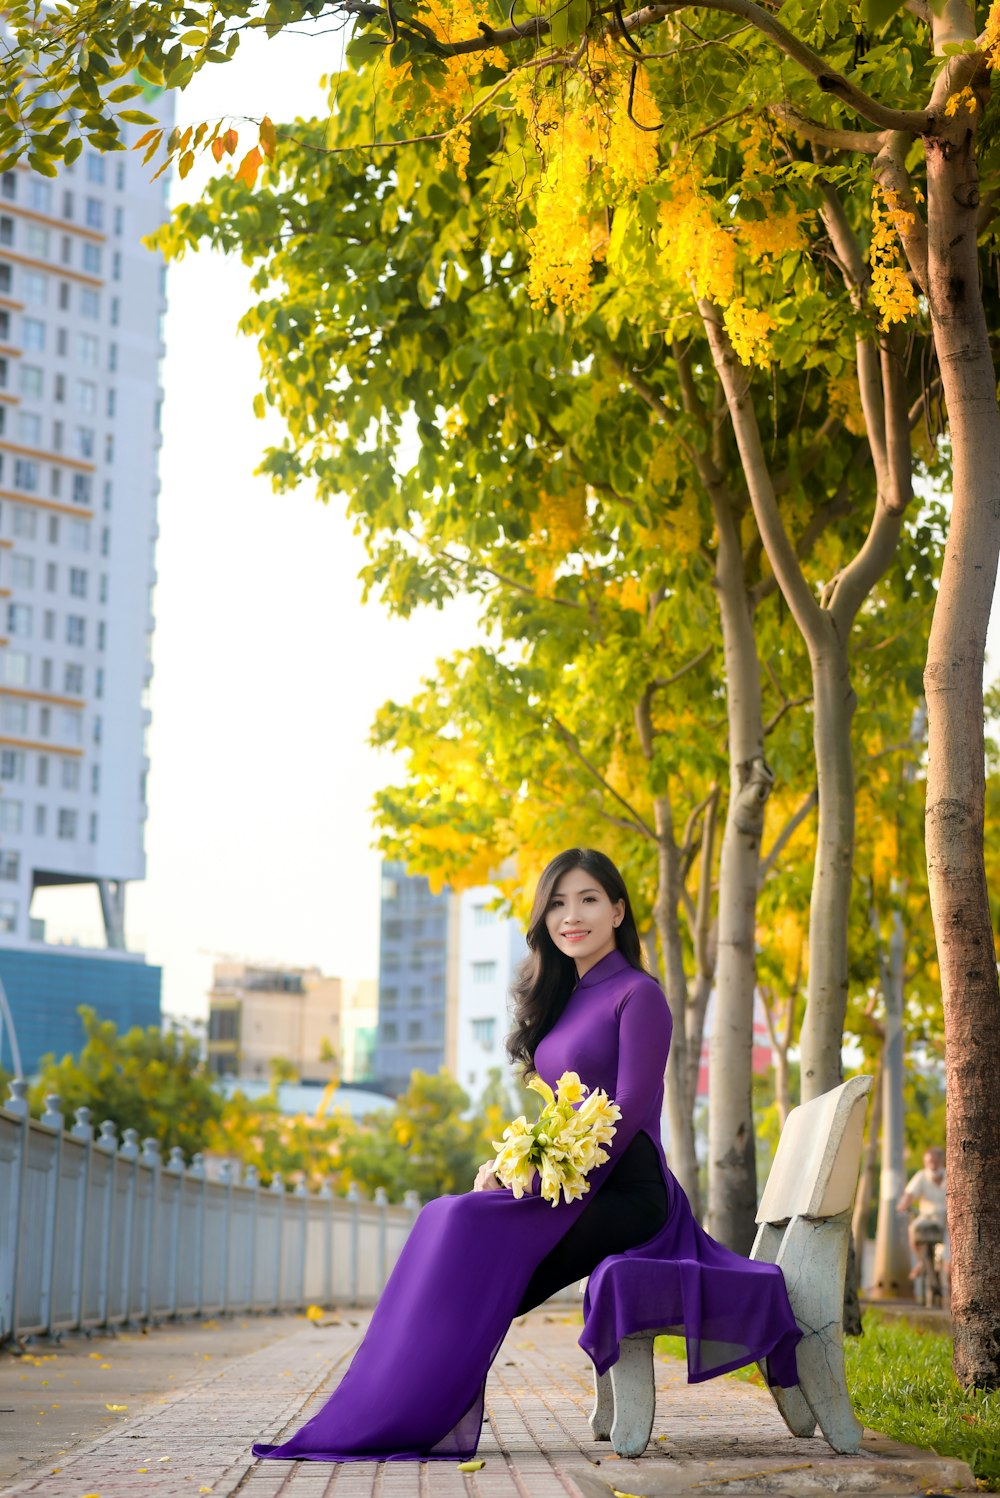 woman in purple dress standing under tree during daytime